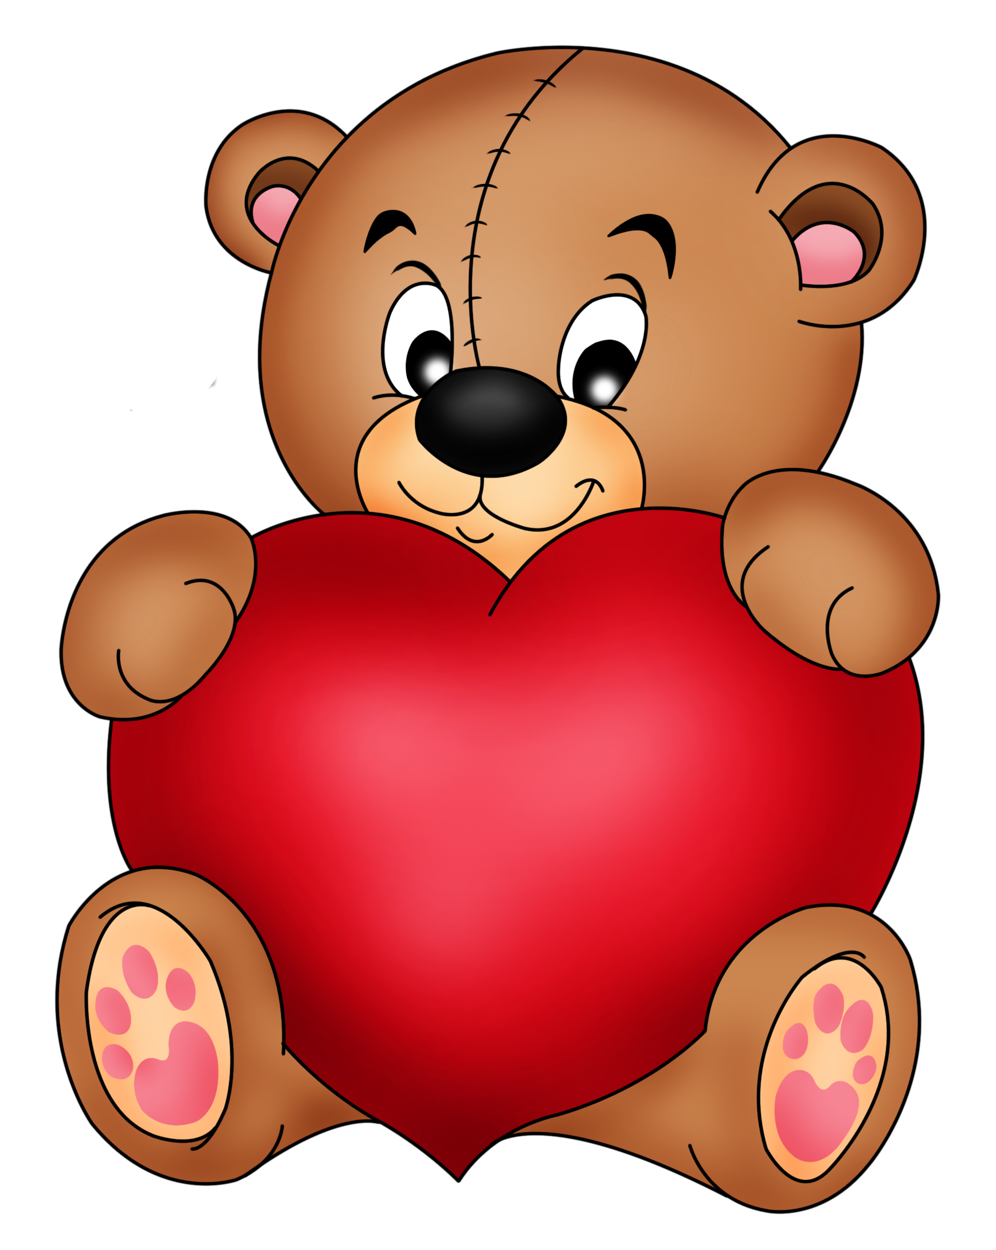 Heart Picture Love Artwork Free Download Image PNG Image